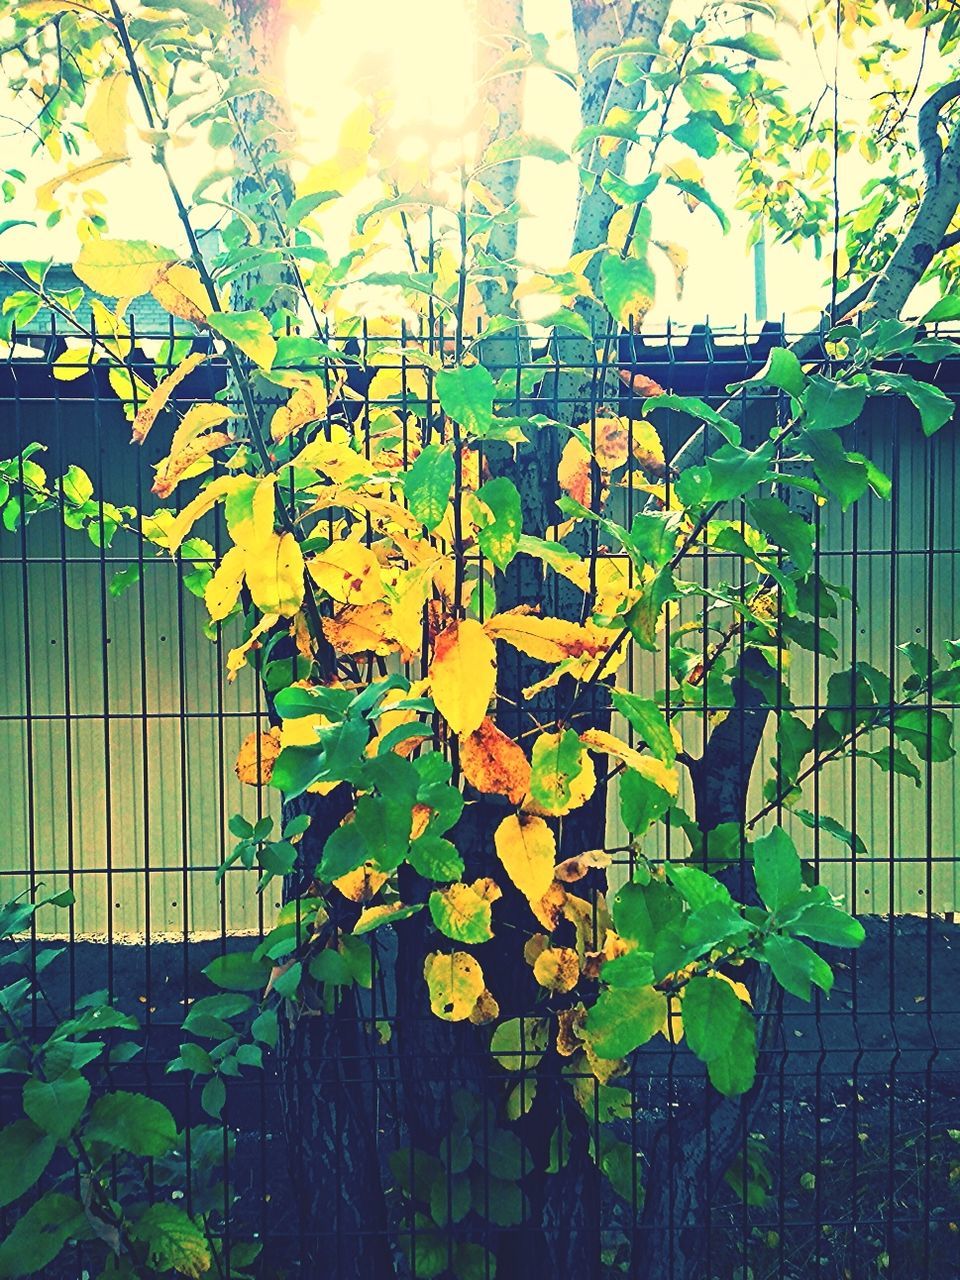 growth, plant, leaf, fence, nature, green color, sunlight, growing, wall - building feature, beauty in nature, day, freshness, railing, outdoors, no people, ivy, built structure, branch, fragility, close-up